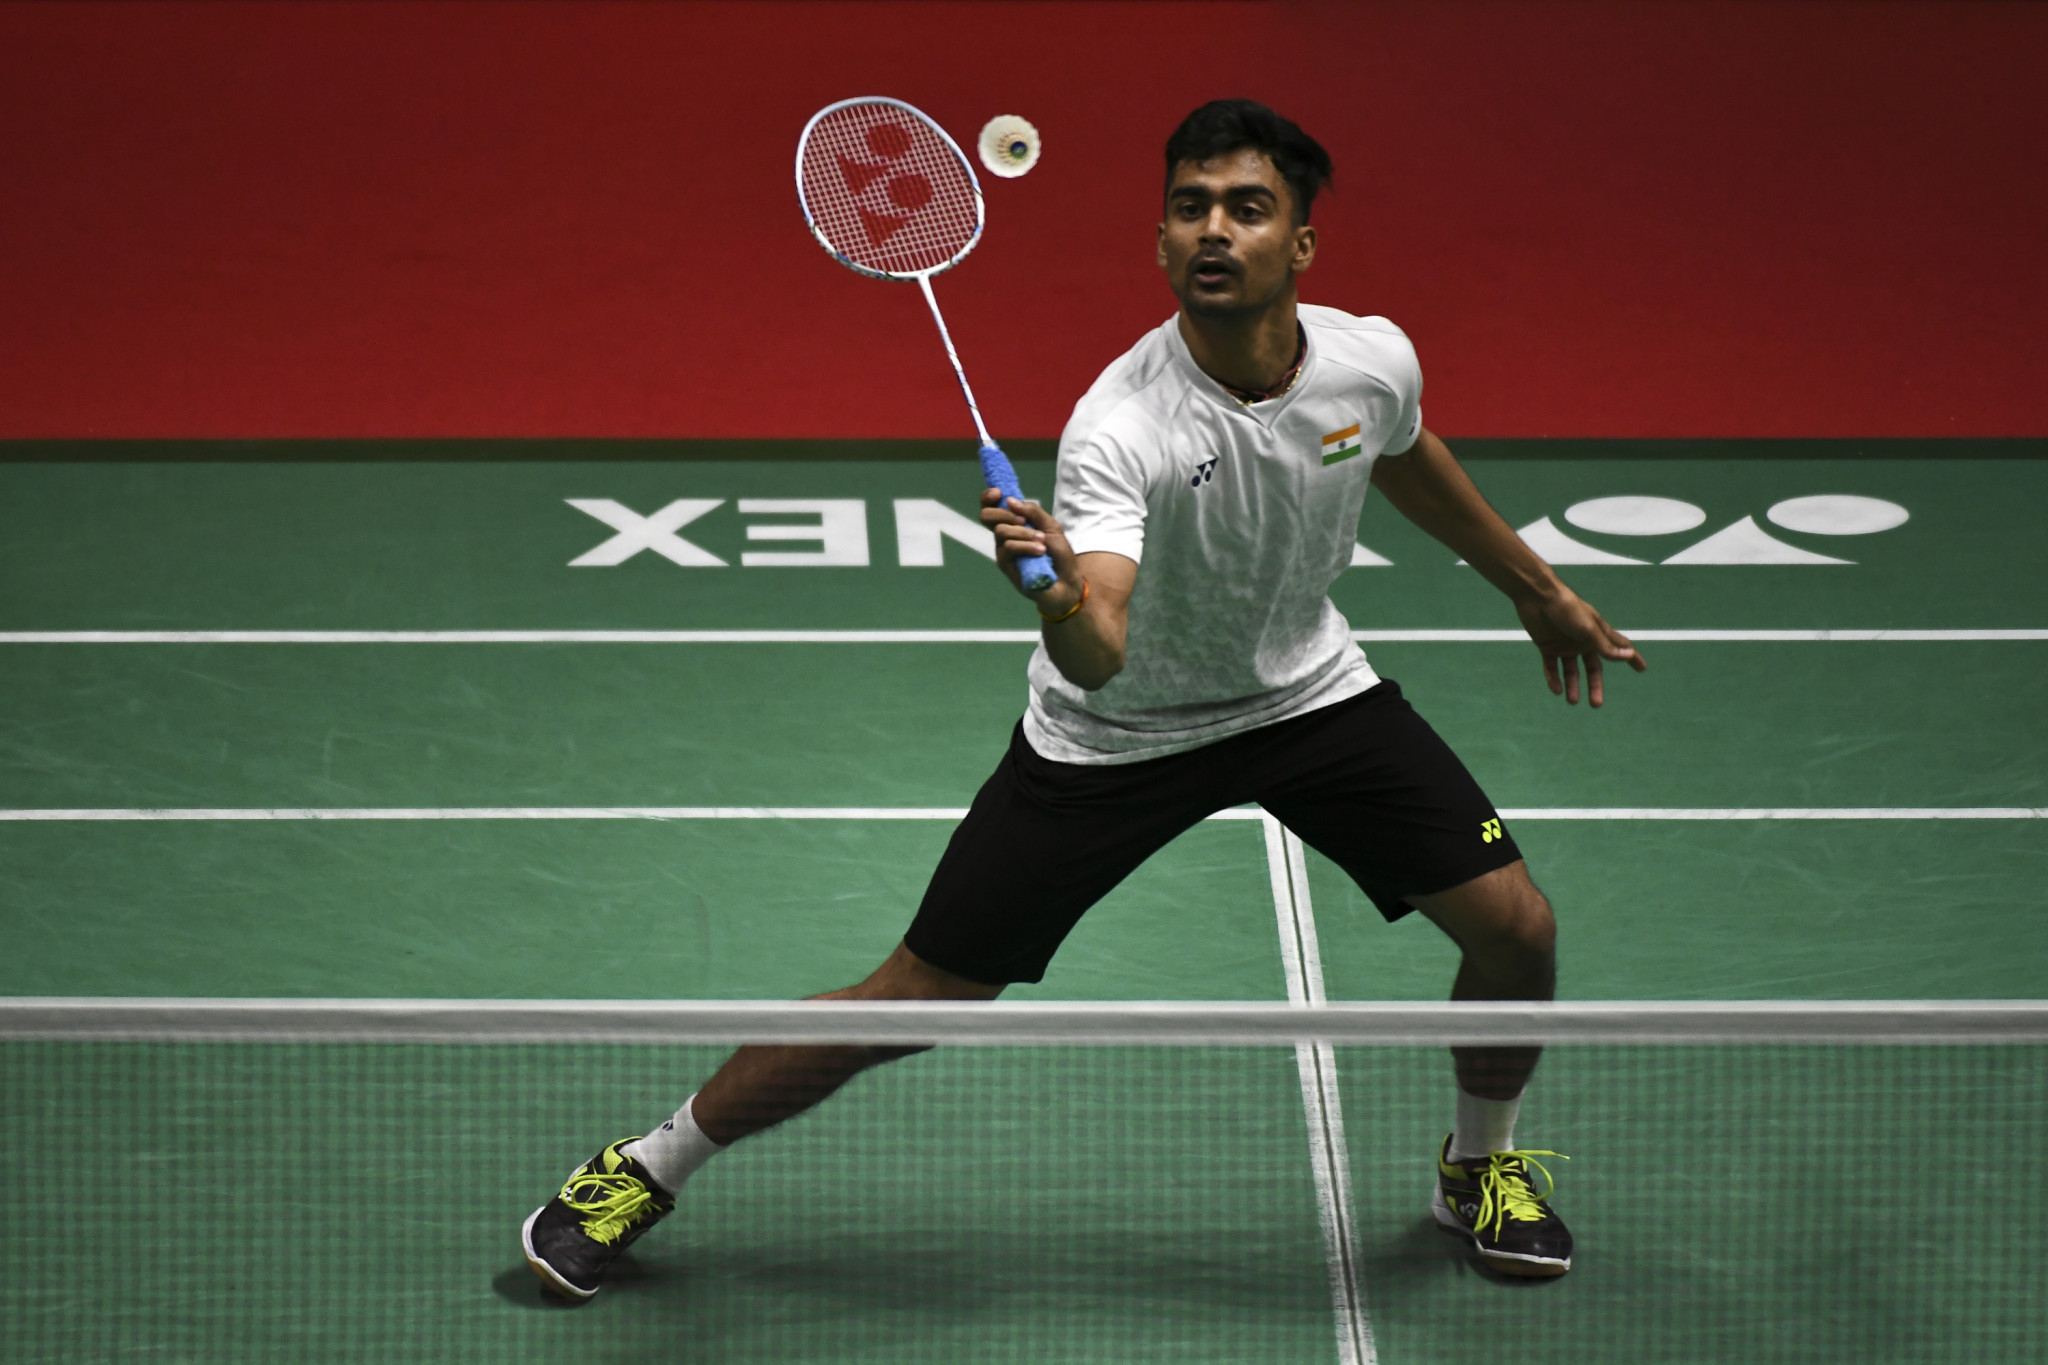 India's Sameer Verma is the top seed in the men's singles event ©Getty Images